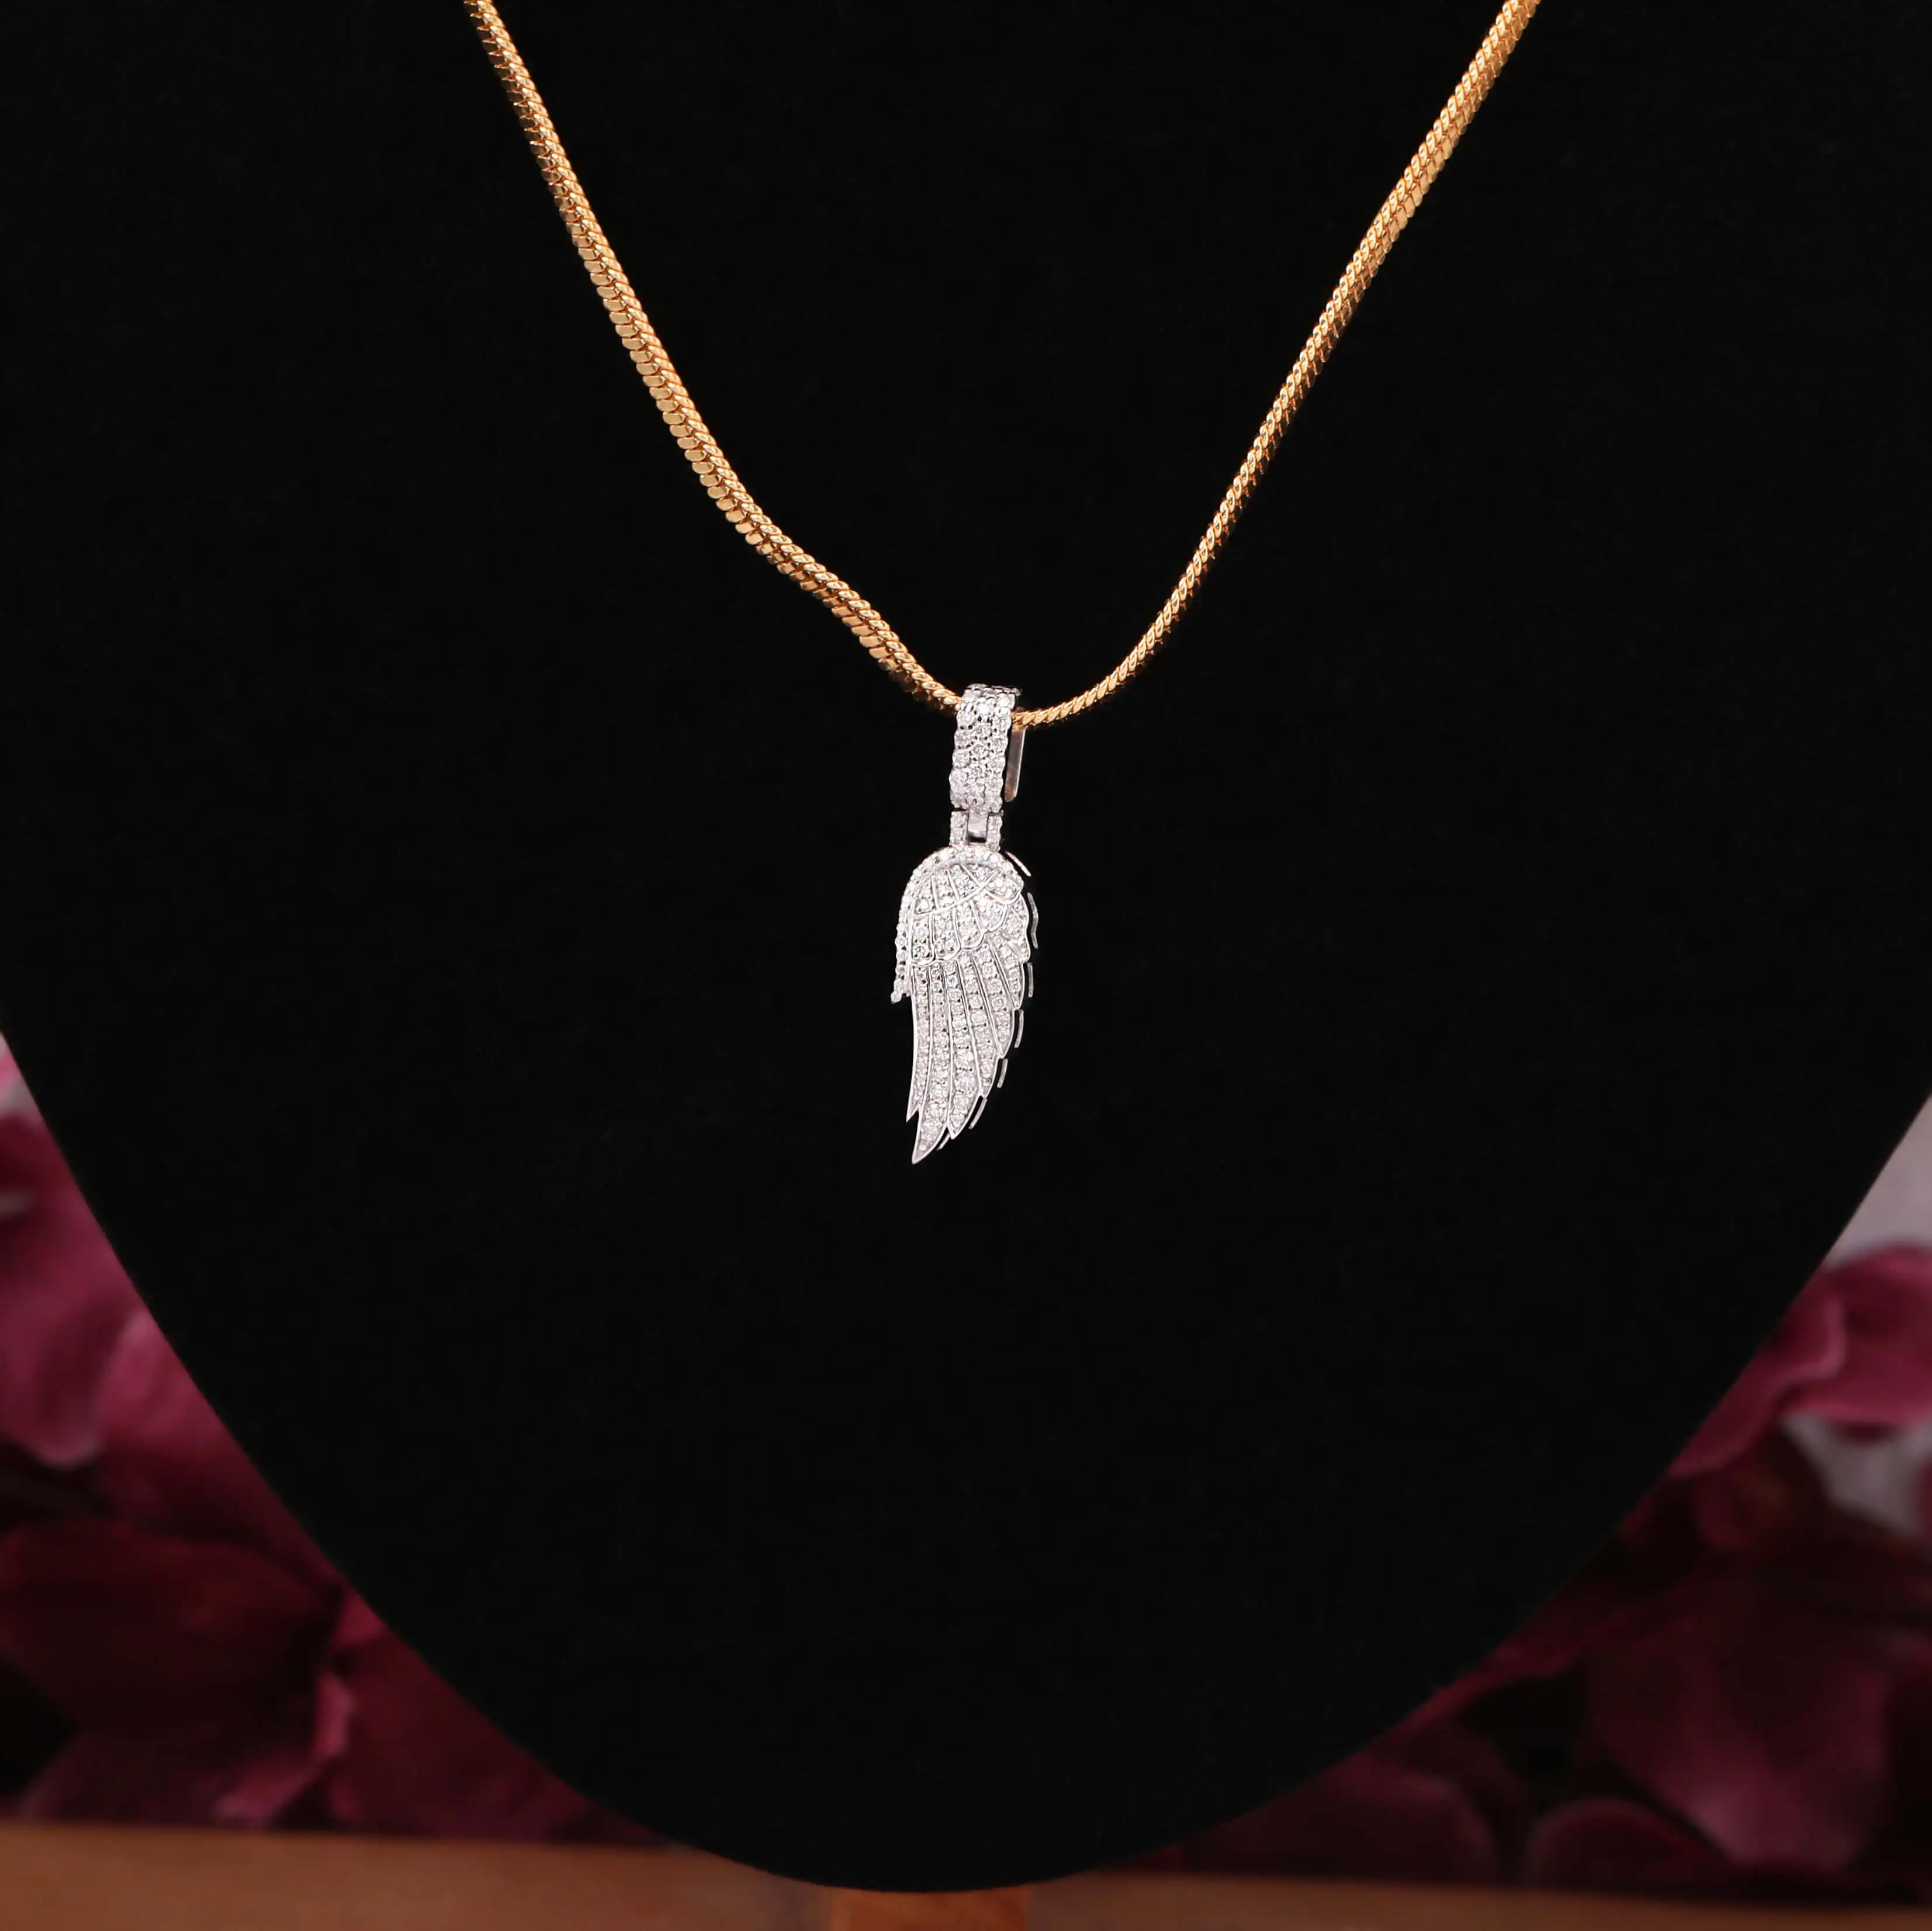 FEATHER SHAPED AESTHETIC PENDANT WITH TINEY ROUND LAB GROWN DIAMOND IN 14KT SOLID GOLD FOR ALL OCCASIONS FOR WOMEN